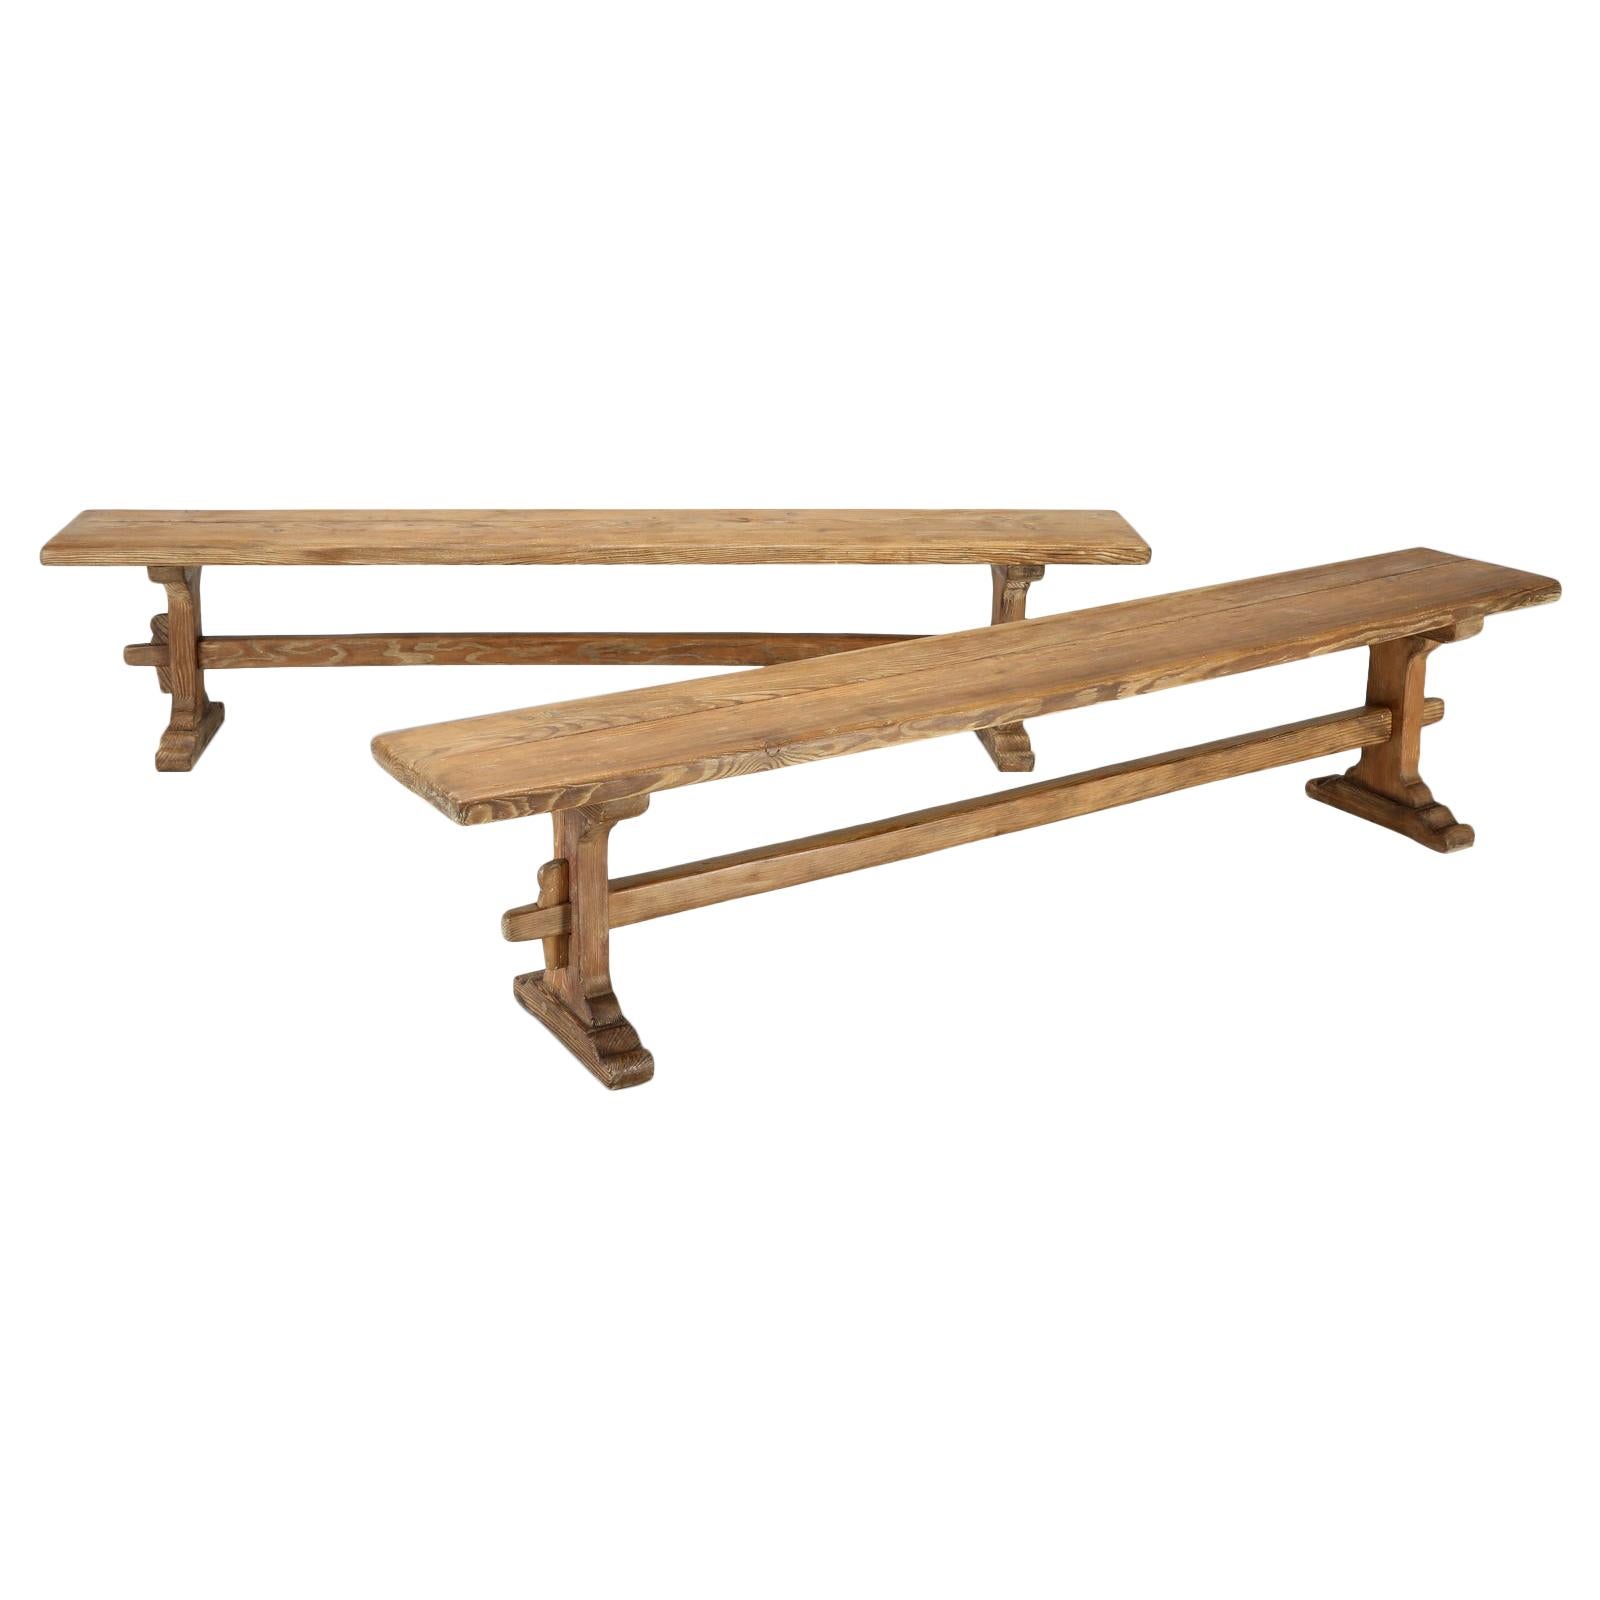 Pair of Scrubbed Pine Farmhouse Table Benches, Fully Restored Structurally